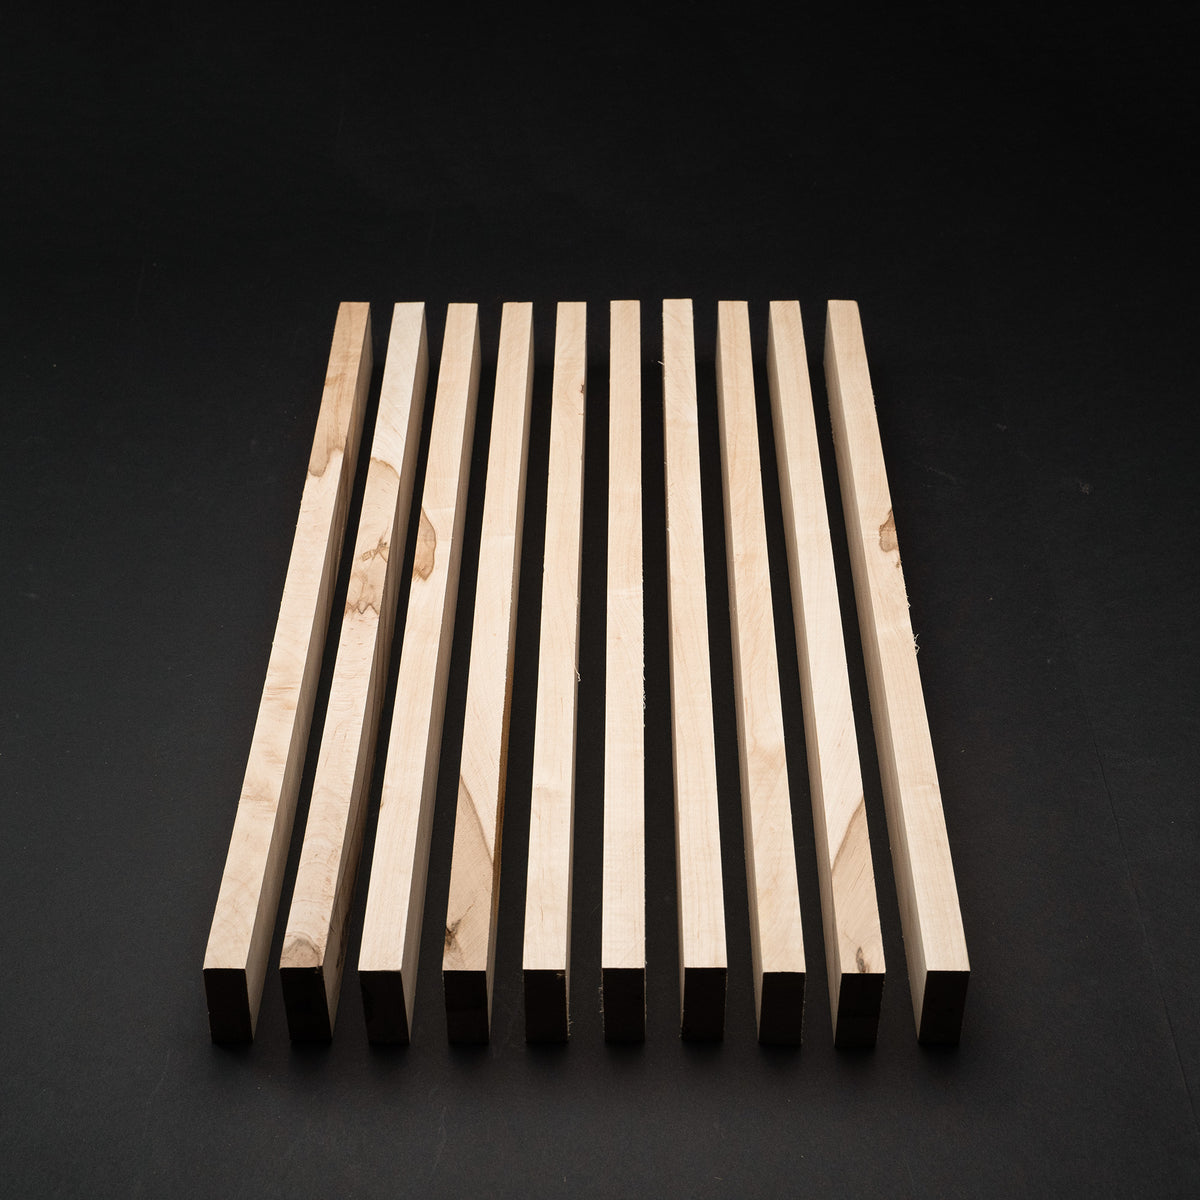 3/4&quot; x 2&quot; x 24&quot; Hard Maple Boards - Pack of 5, 10, 15 or 20 - DIY Cutting Charcuterie Cheese Boards Tray - Kiln Dried